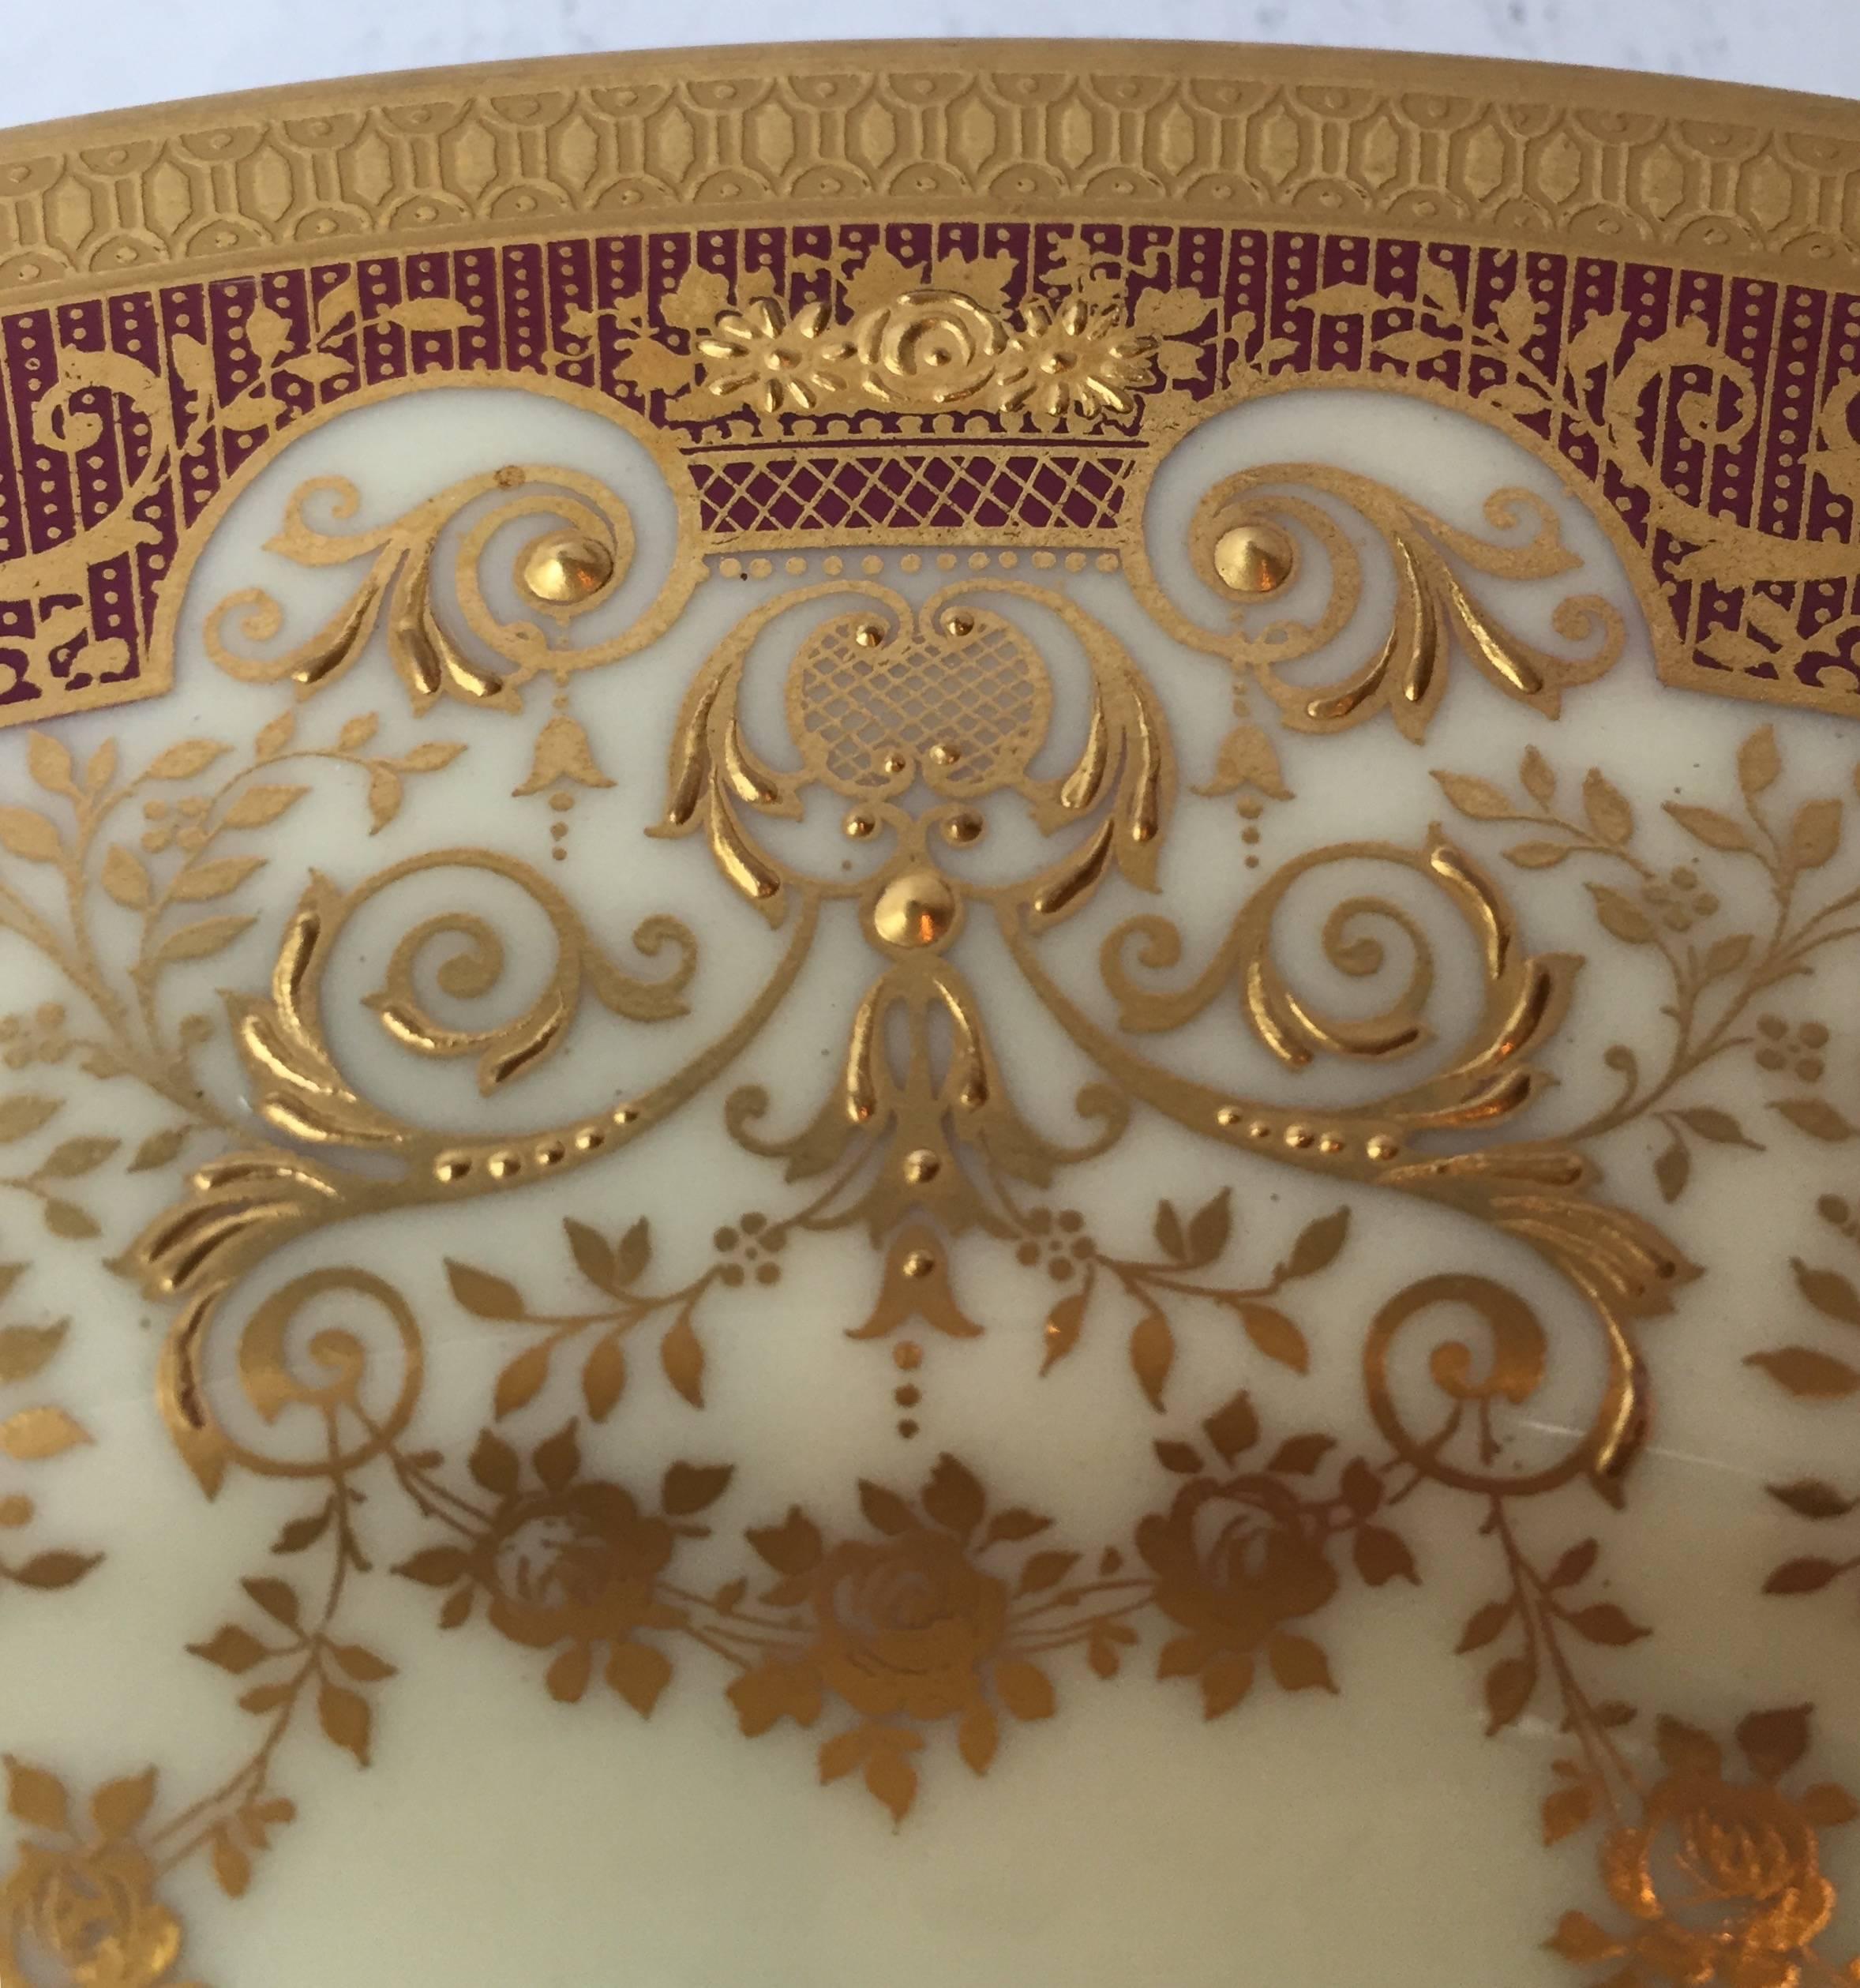 A rich beautiful design in highly raised paste gilding over an iridescent red
ground color some of the finest you will see. Great to have all 12 present and in remarkable condition. These would look fantastic on display while not in use,
perfect